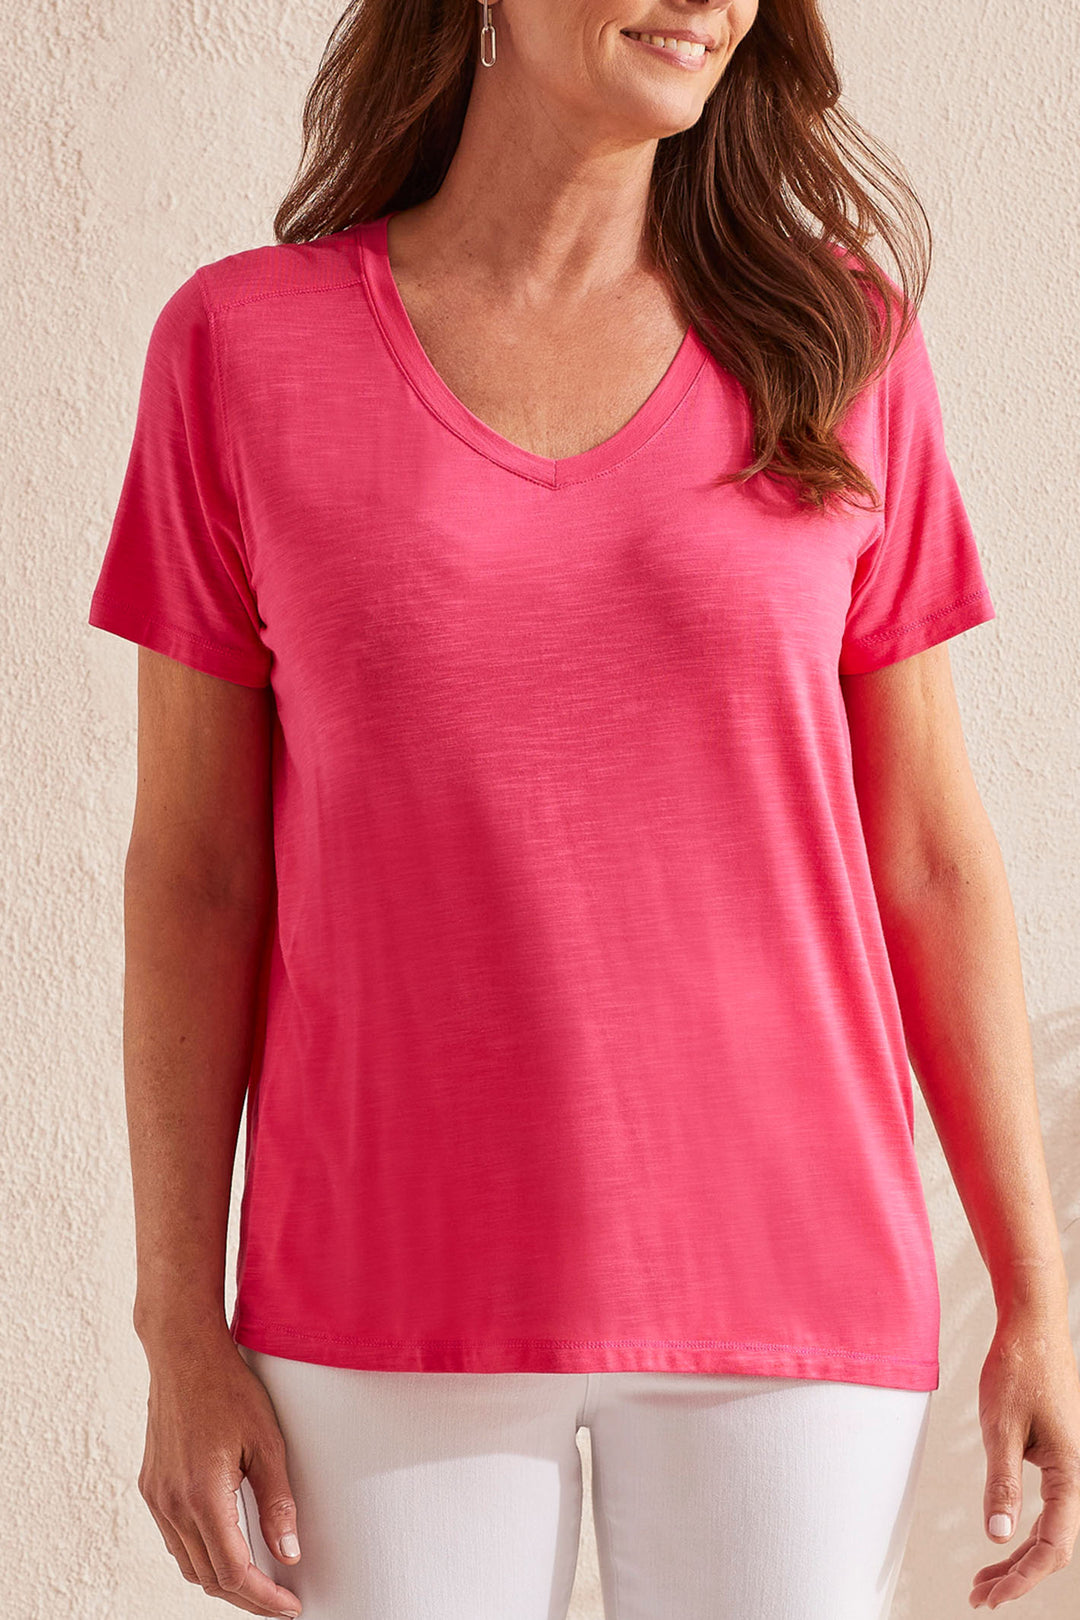 Tribal 1730O Raspberry Pink V-Neck T-Shirt - Experience Boutique